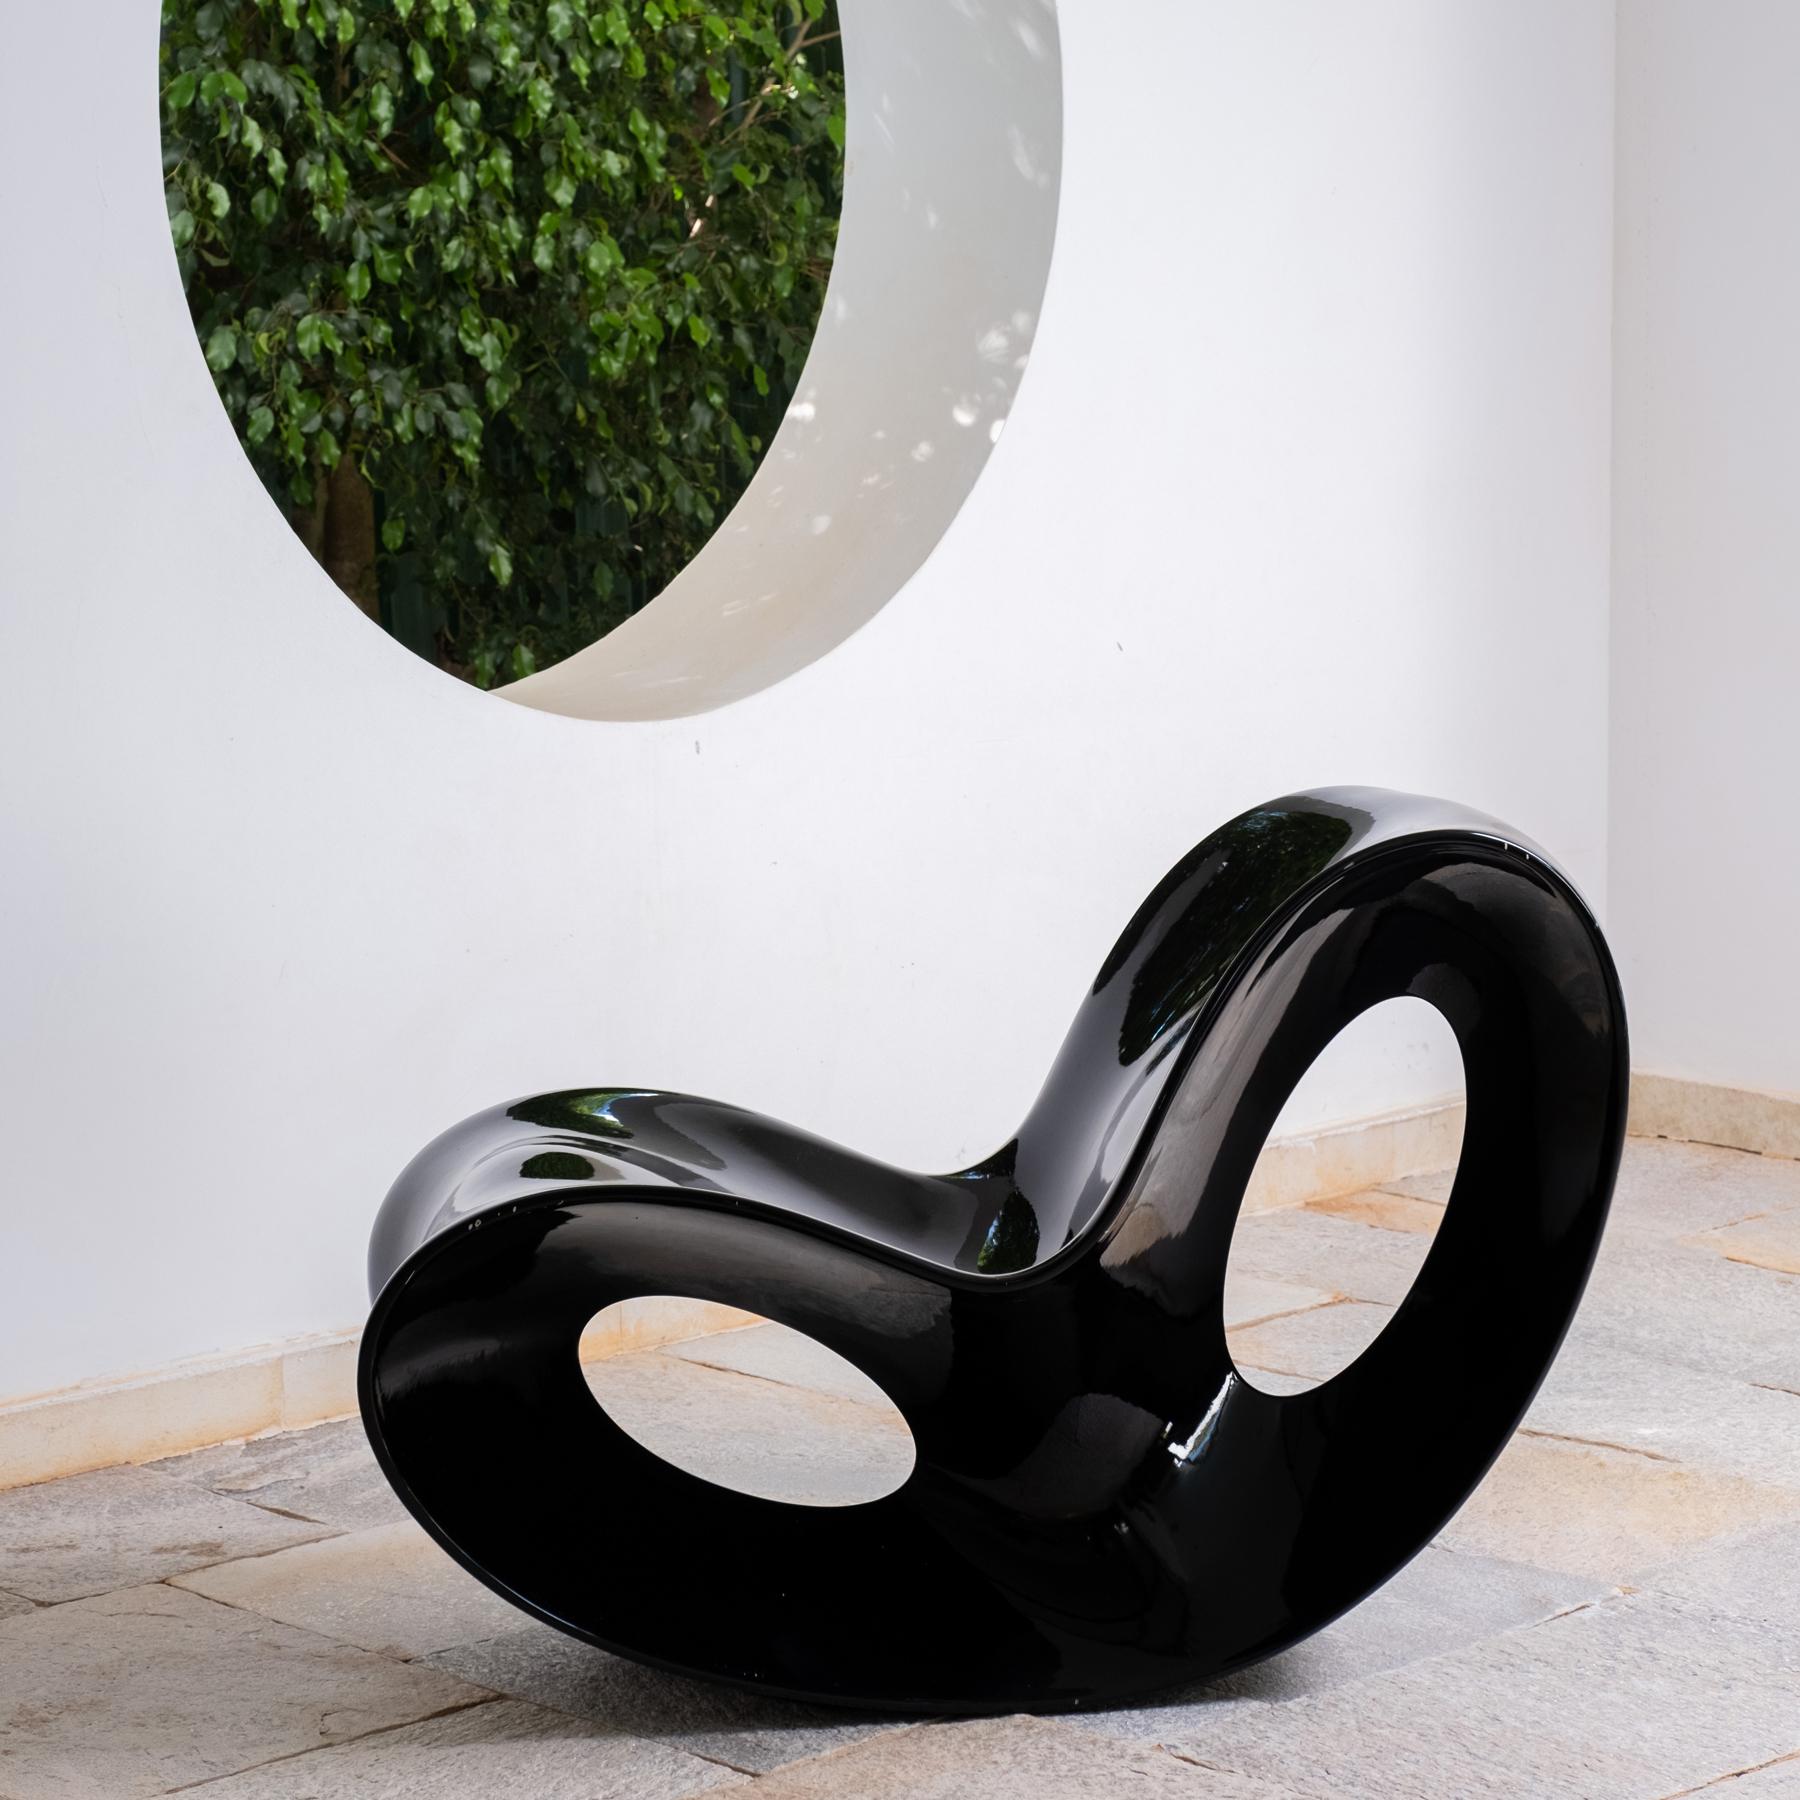 The Voido Rocking Chair was designed by Ron Arad for the manufacturer Magis in 2006.
This piece of contemporary design is a true sculpture due to its personality and timeless style.It is extremely resistant and durable and offers great comfort,